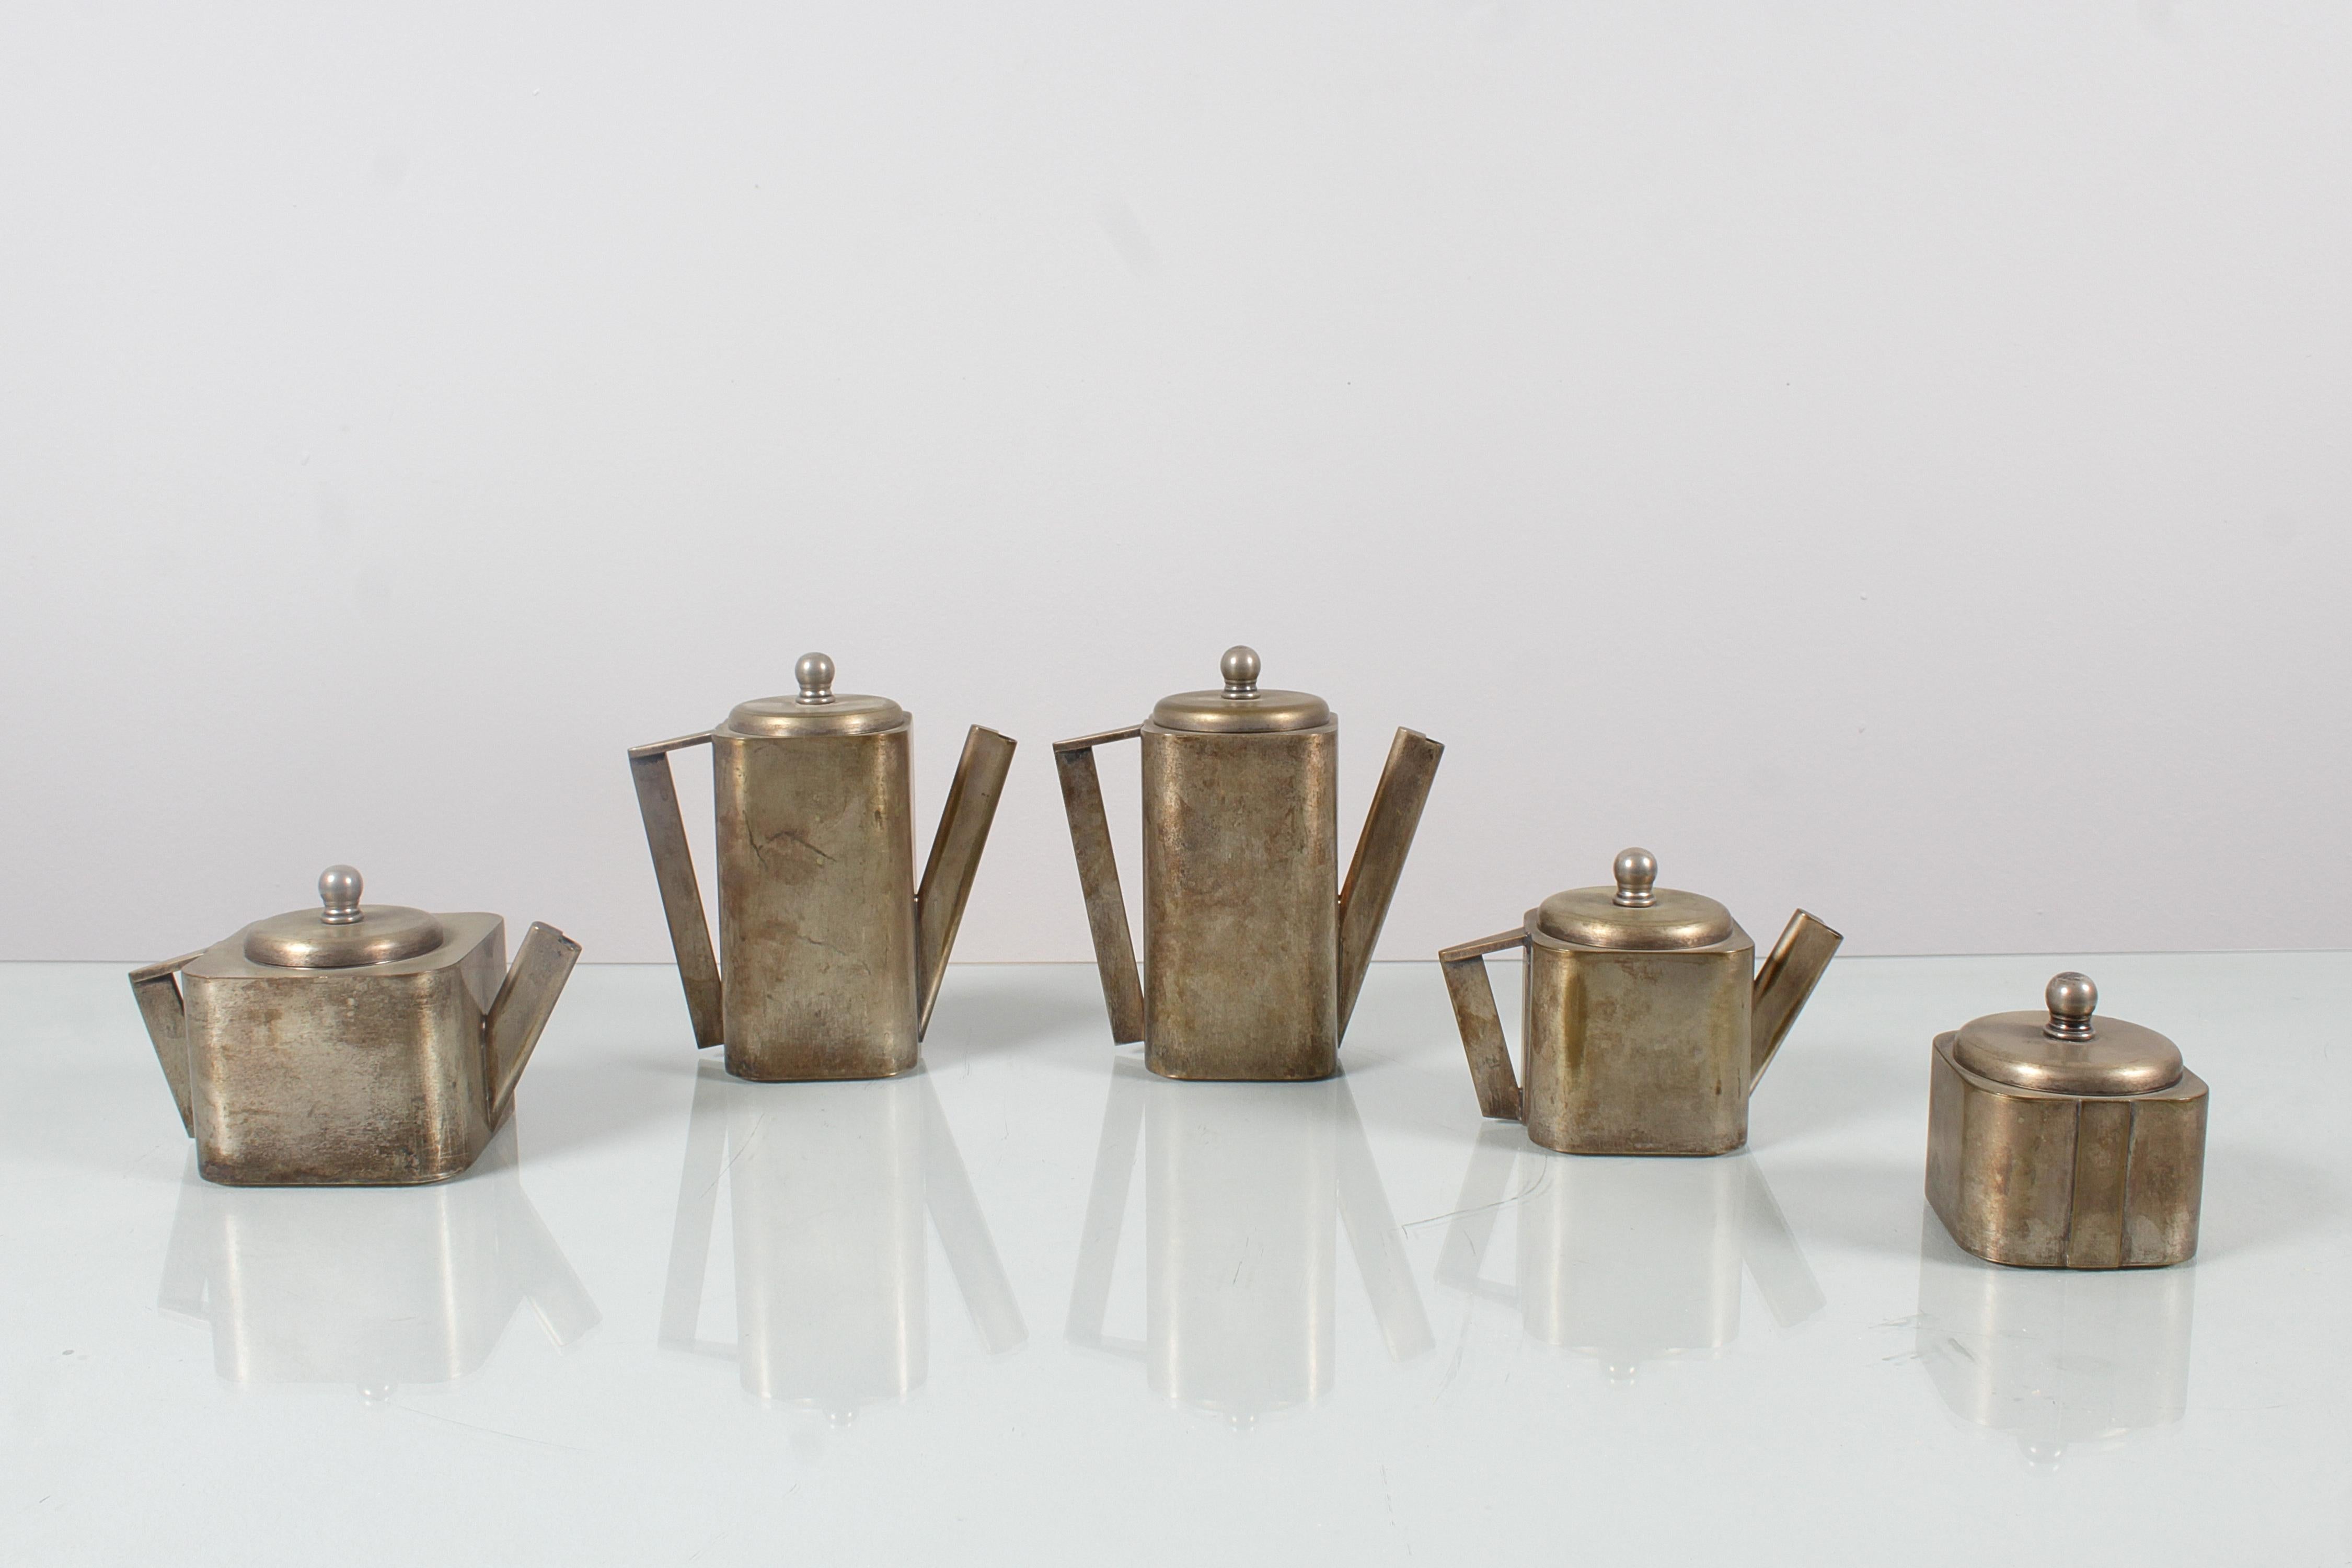 Breakfast set in nickel silver with a beautiful geometric design, consisting of two large and two small teapots and a sugar bowl. Some dings and natural signs of use and age on the surface. Italian production from the 1930s.
The measurements shown